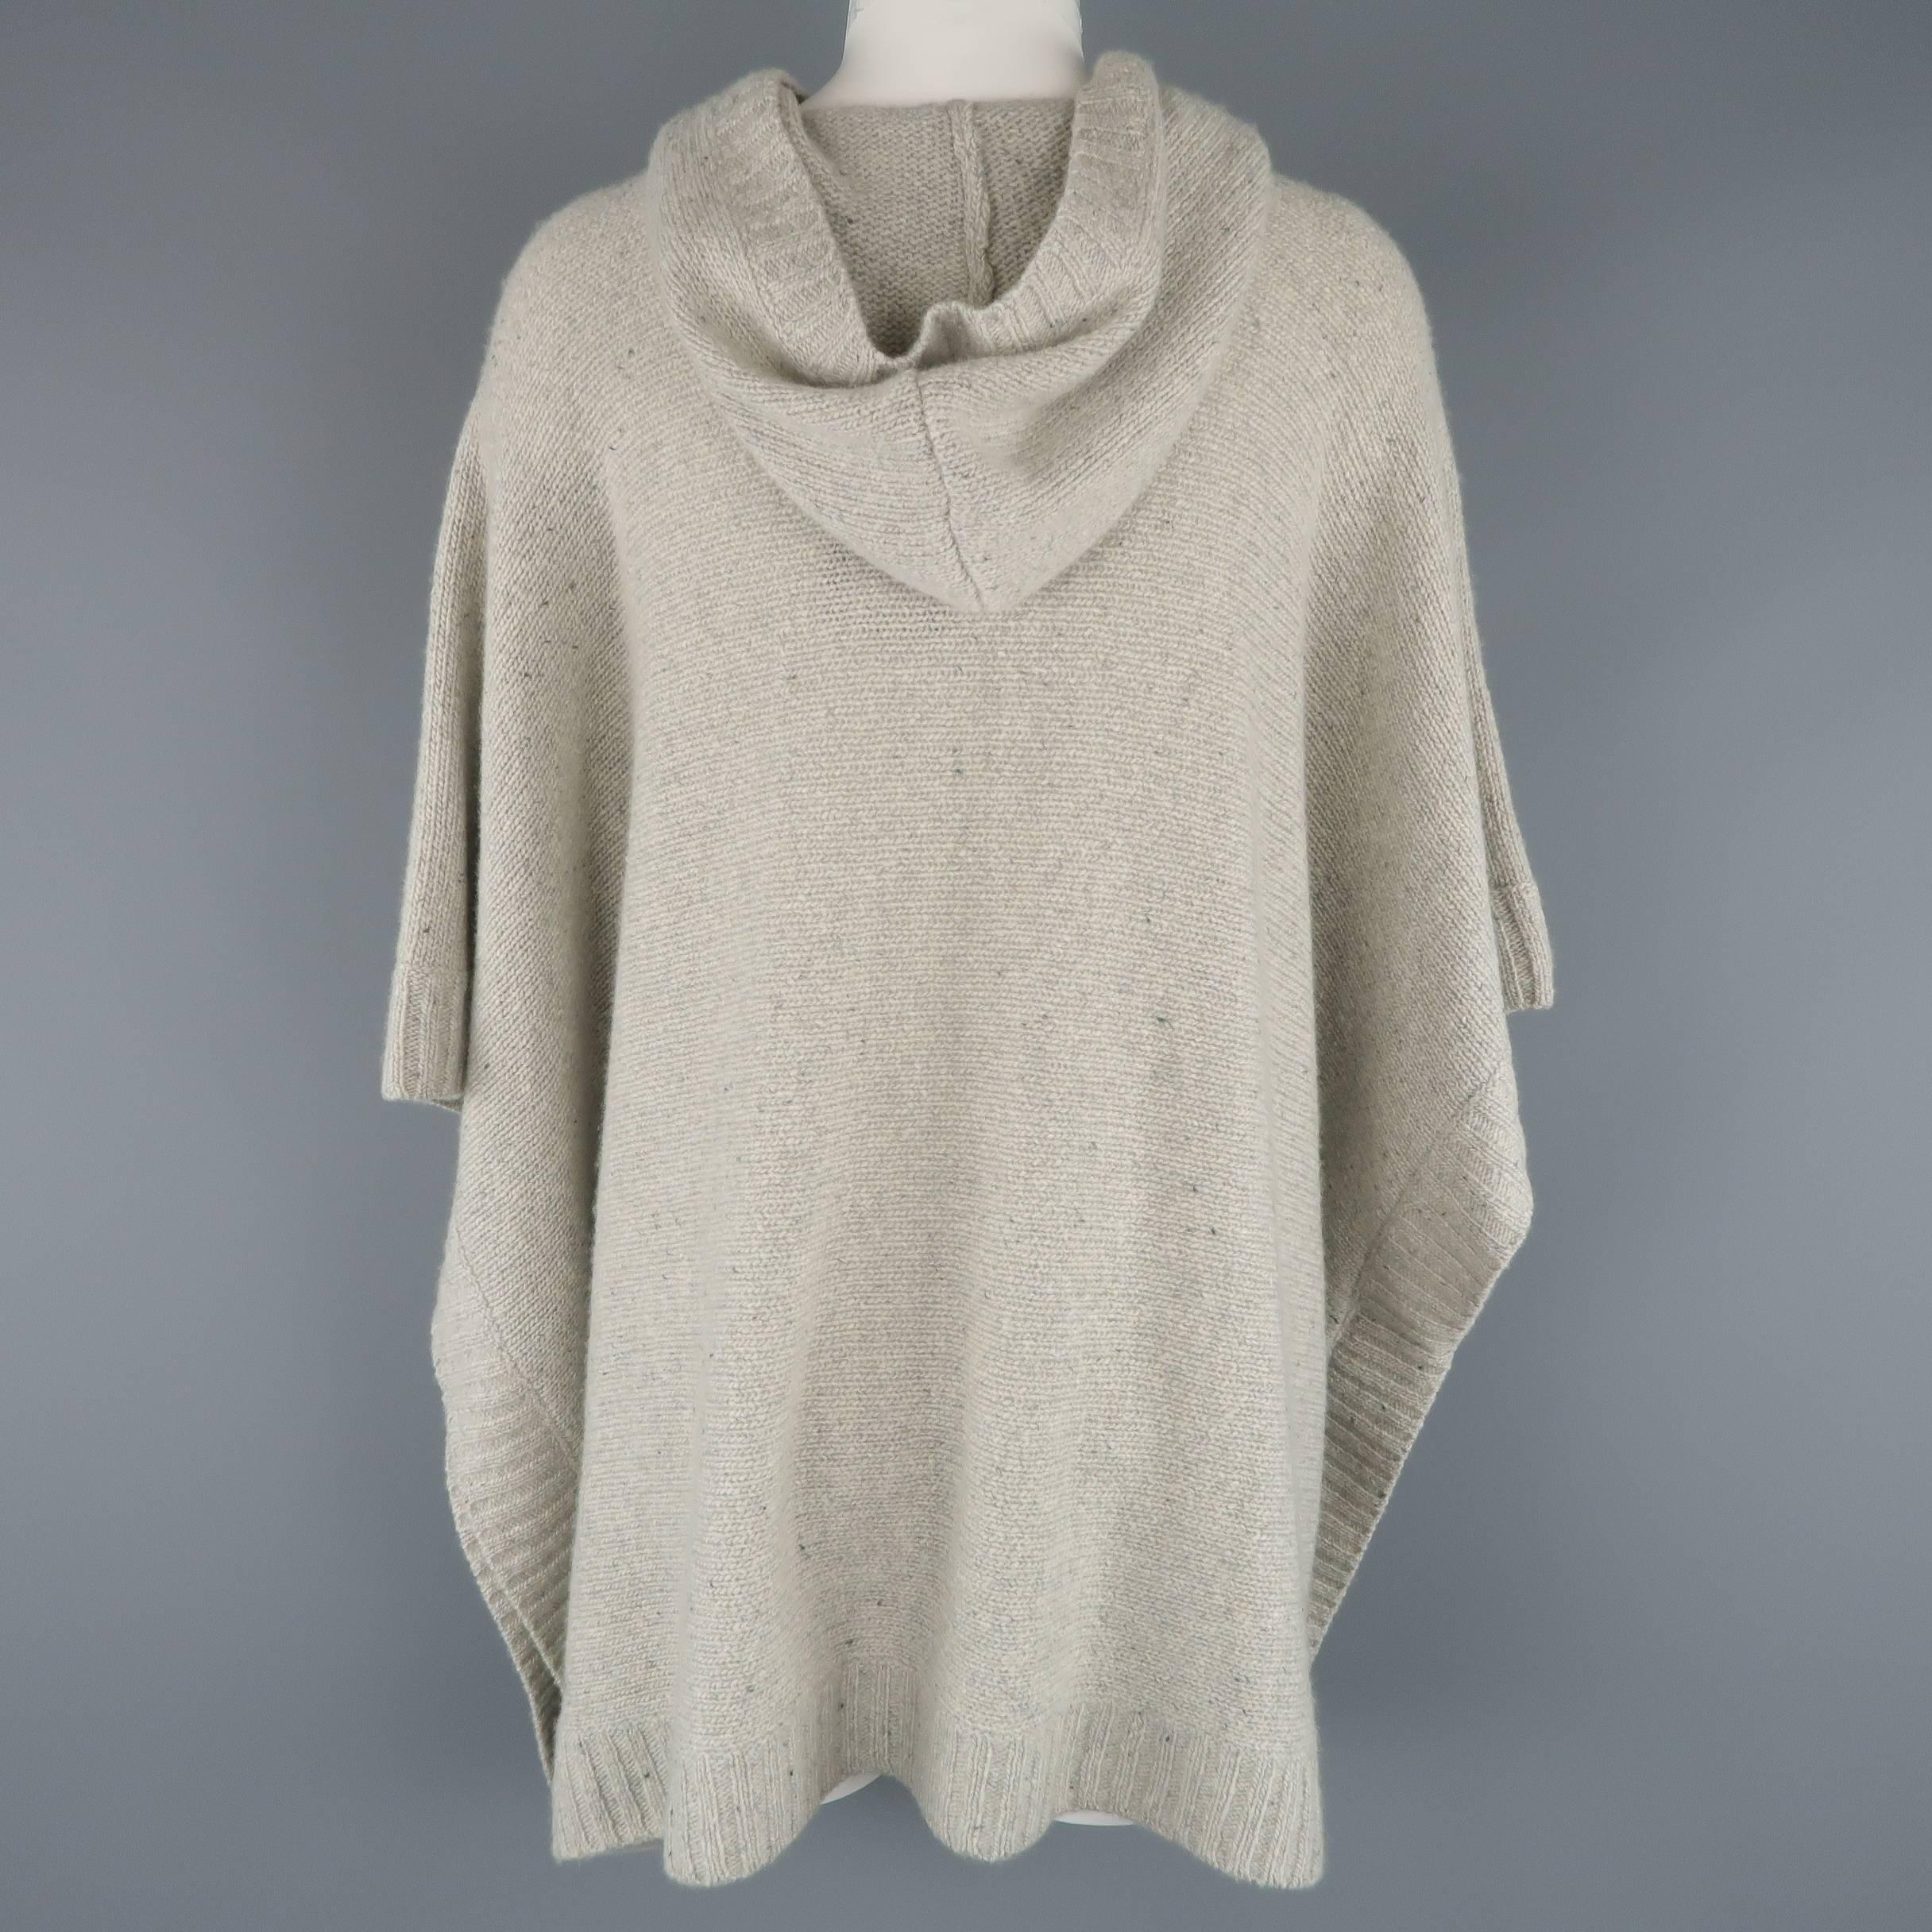 Ralph Lauren Gray Cashmere Knit Hooded Poncho 2